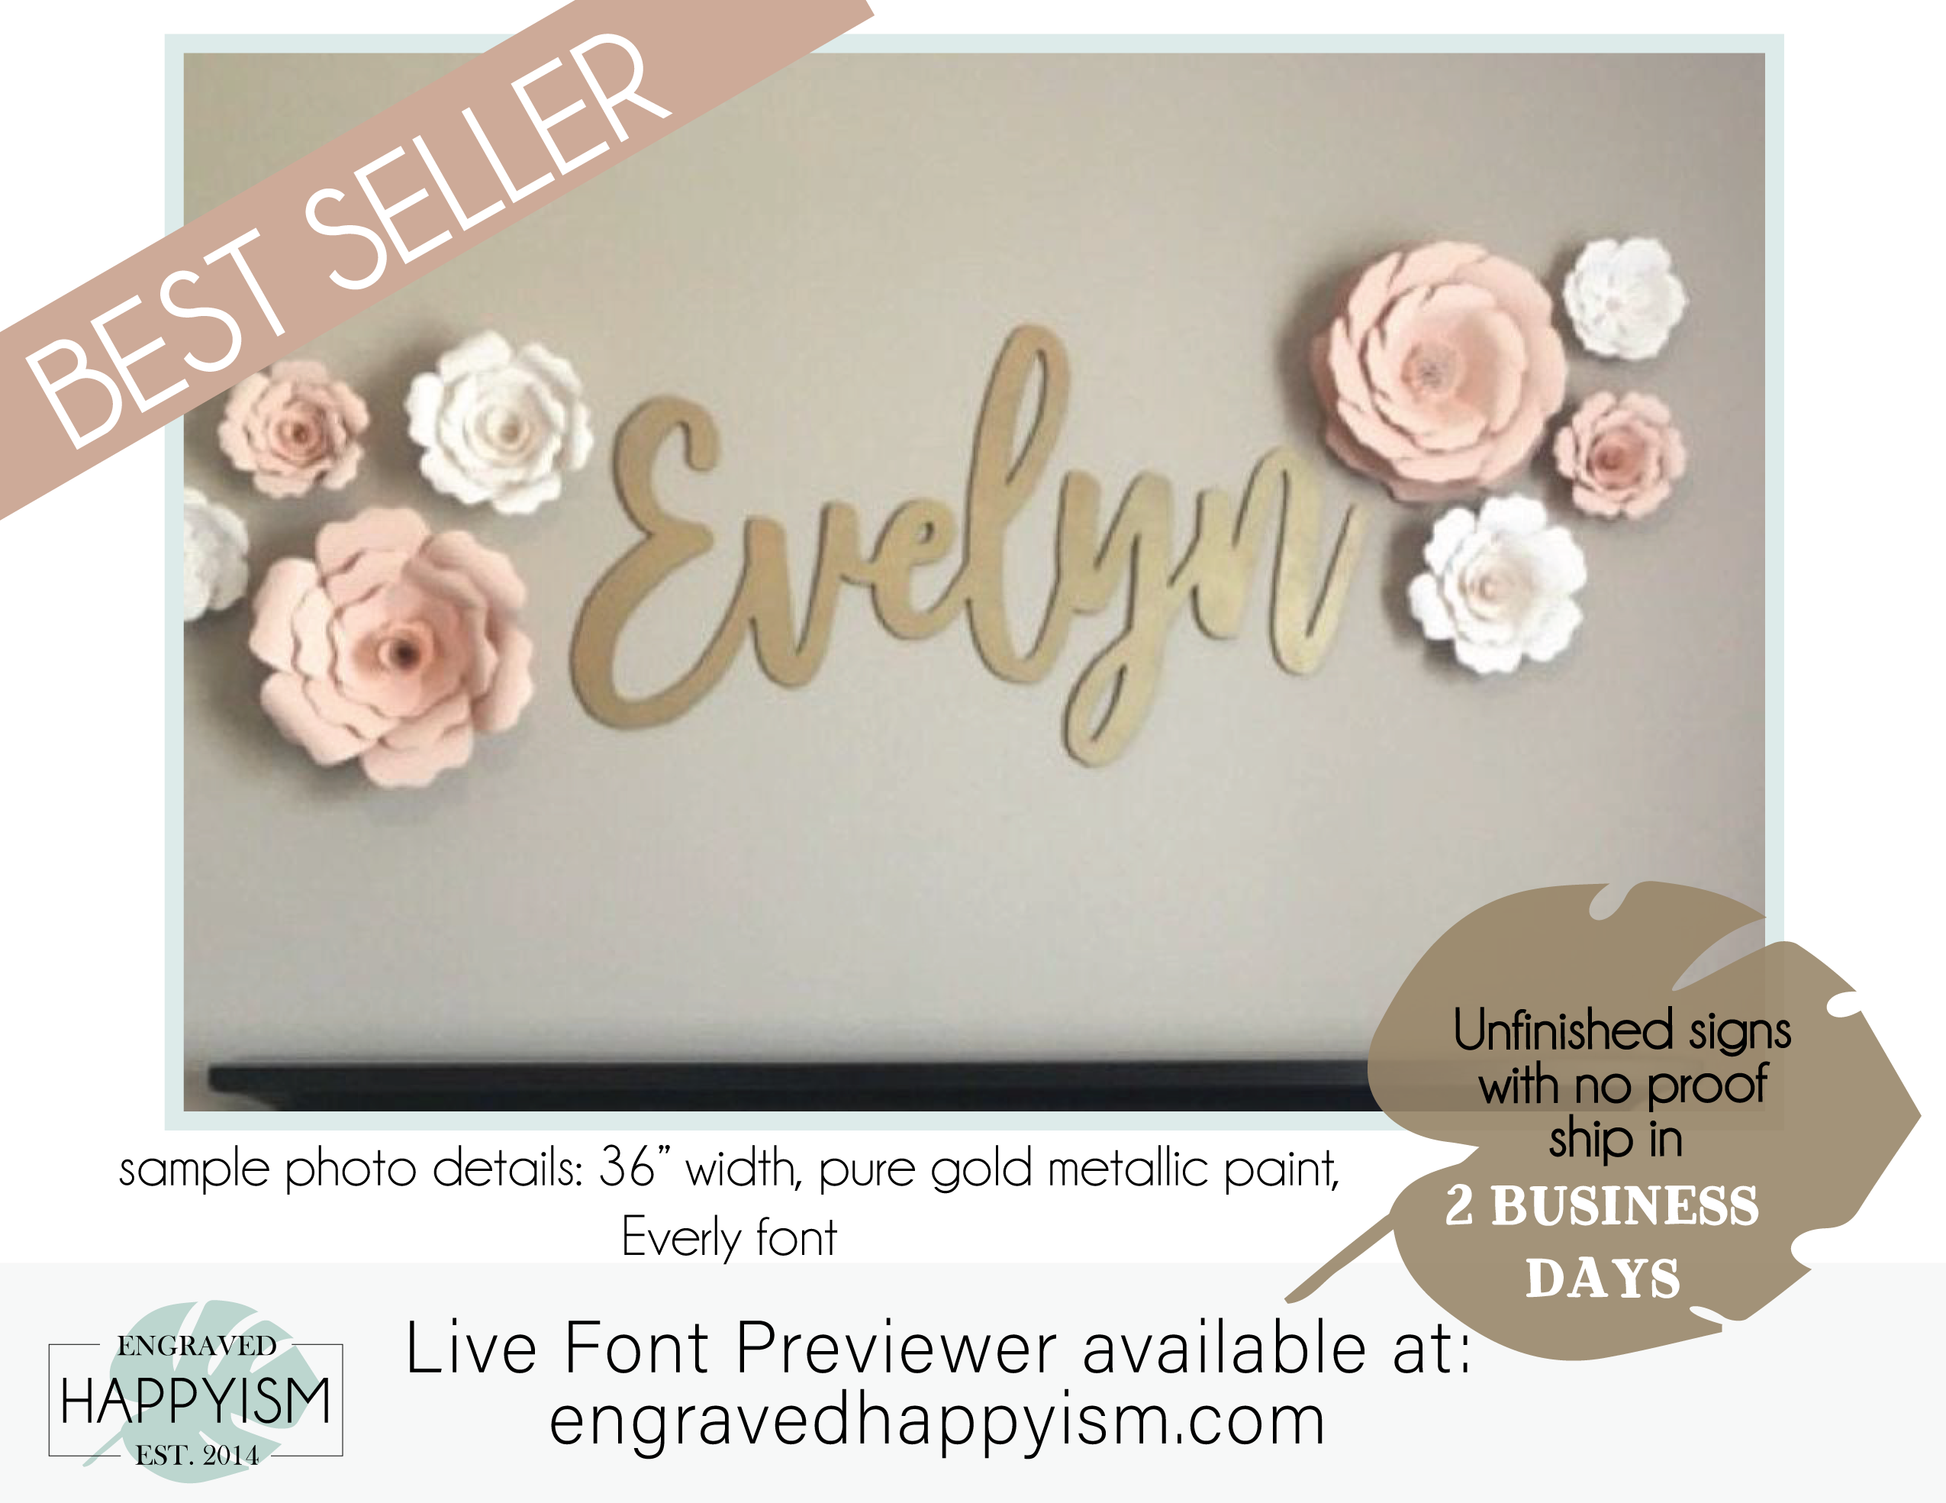 Custom Wood Sign -  Live Preview - up to 48" wide - Paint, Glitter, Stain options - Happyism, Inc. Engraving 